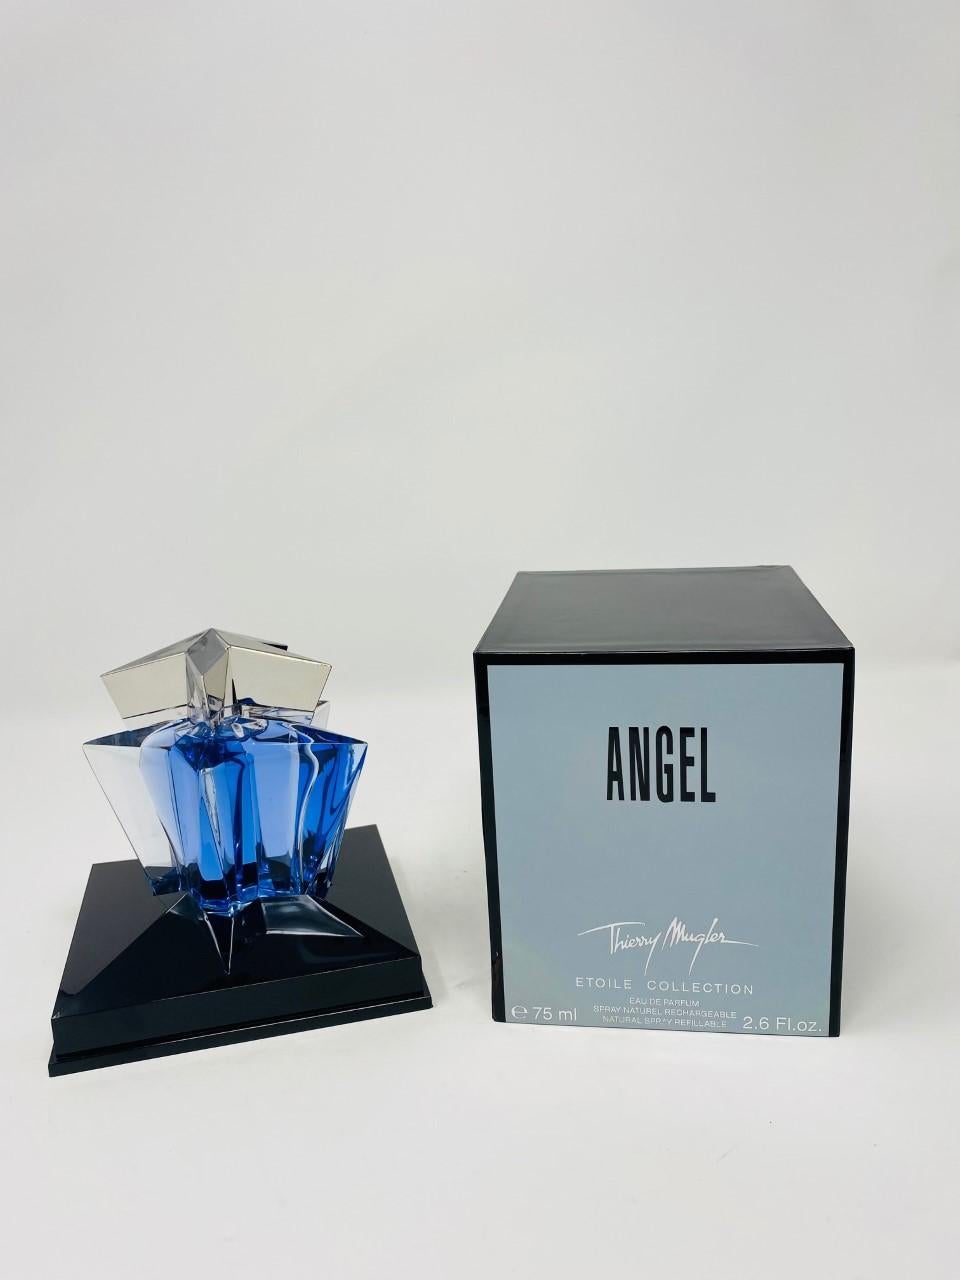 Thierry Mugler Angel Etoile Collection Factice with Box For Sale 2